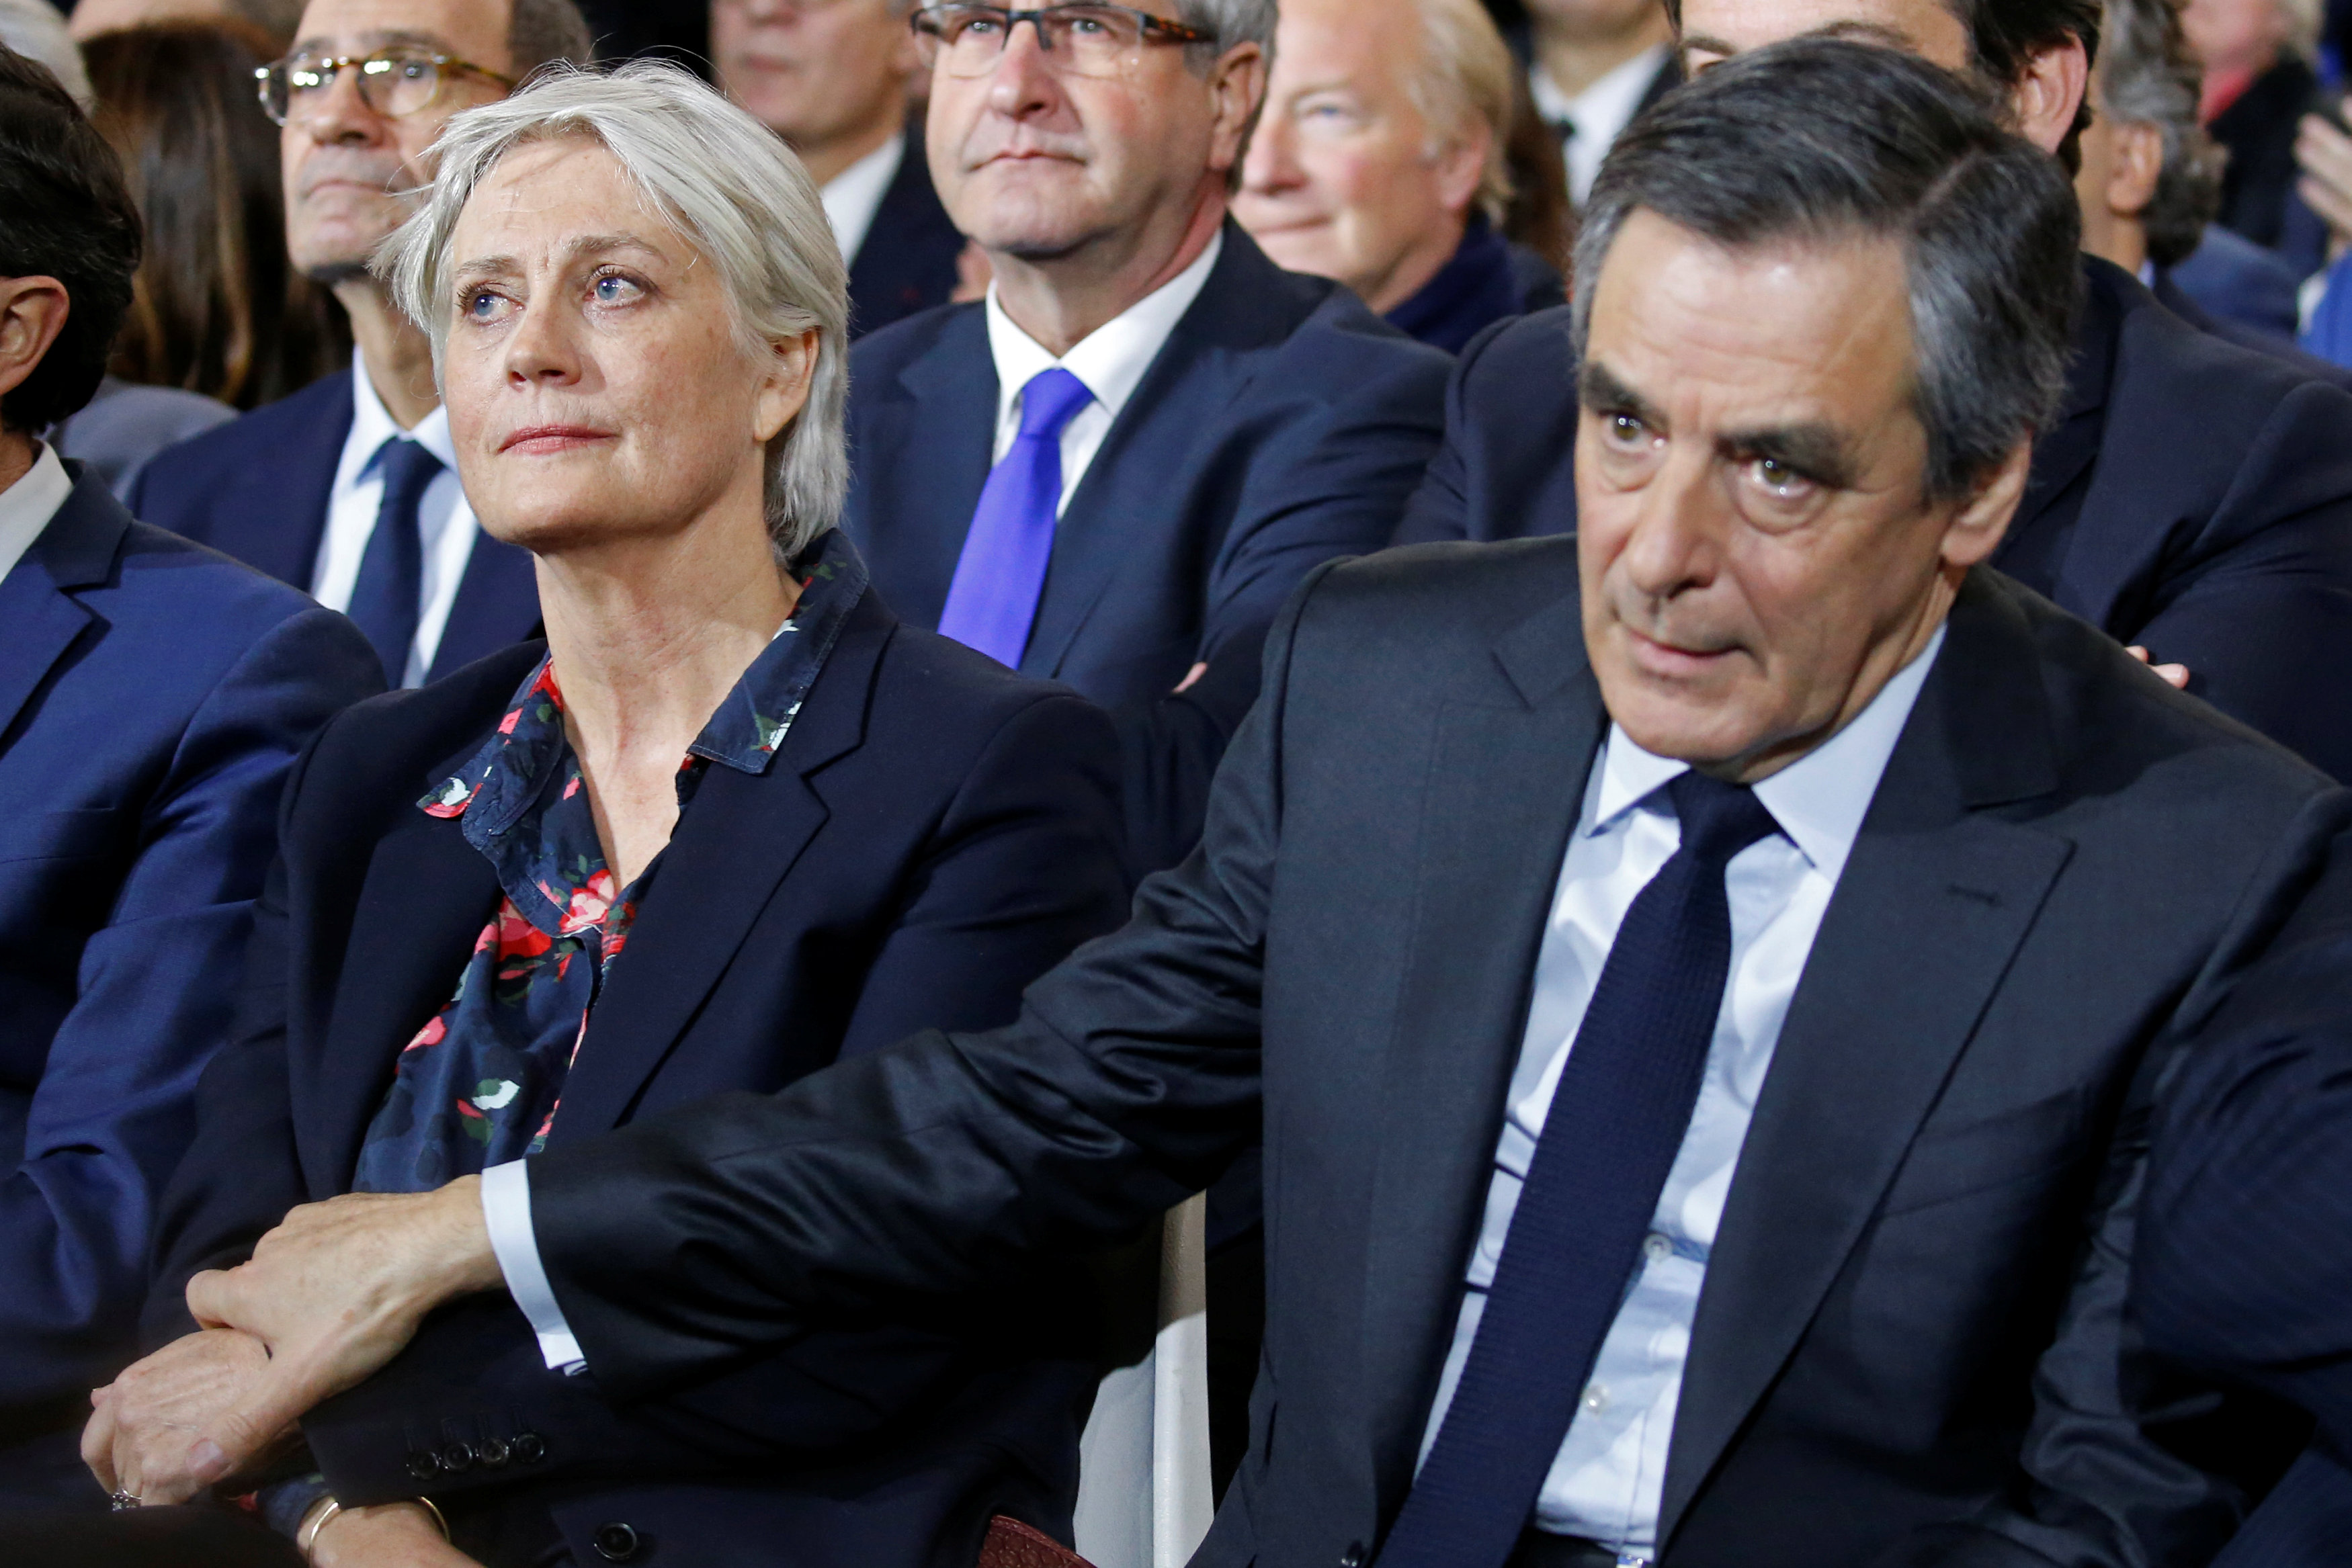 Francois Fillon, member of Les Republicains political party and 2017 presidential candidate of the French centre-right, and his wife Penelope attend a political rally in Paris, France, January 29, 2017. Picture taken January 29, 2017. REUTERS/Pascal Rossignol